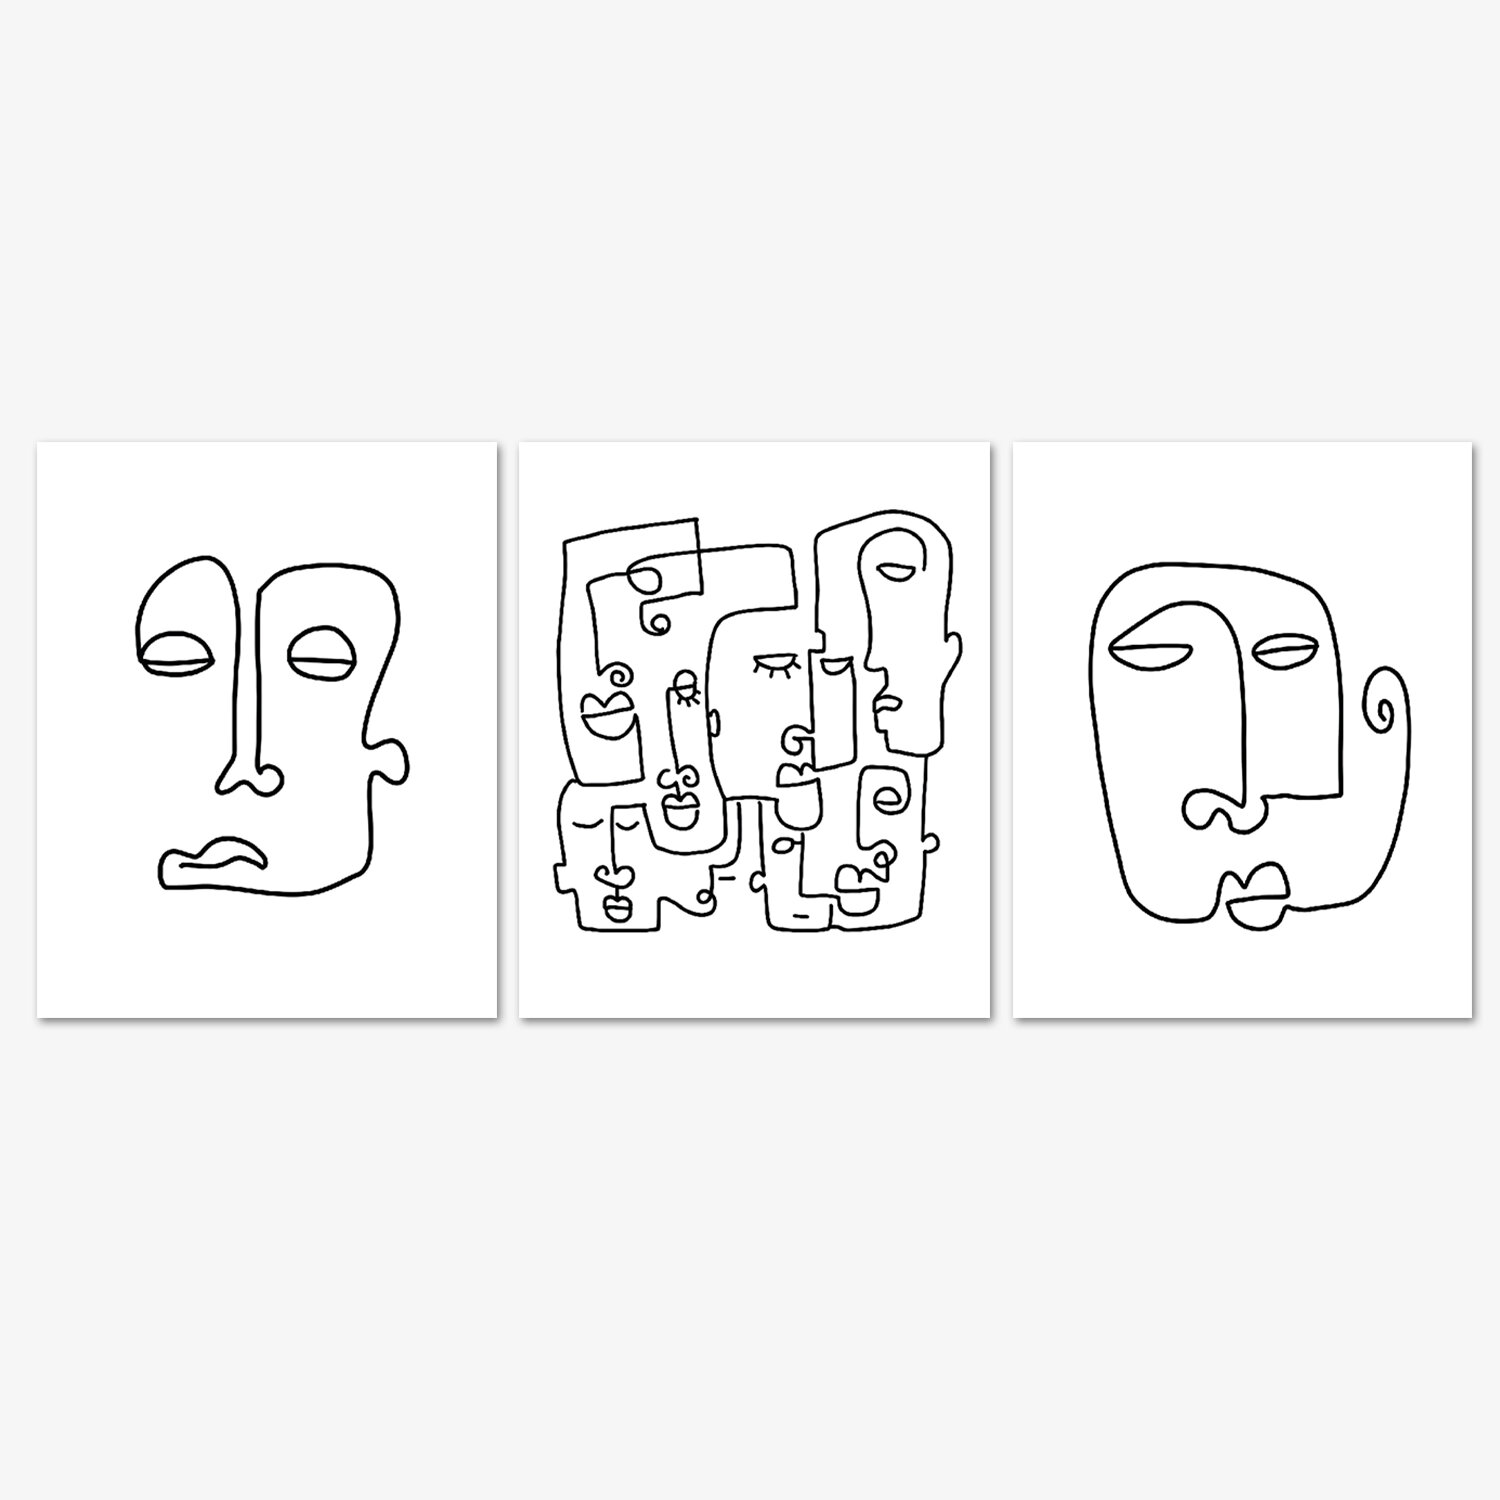 abstract picasso line art